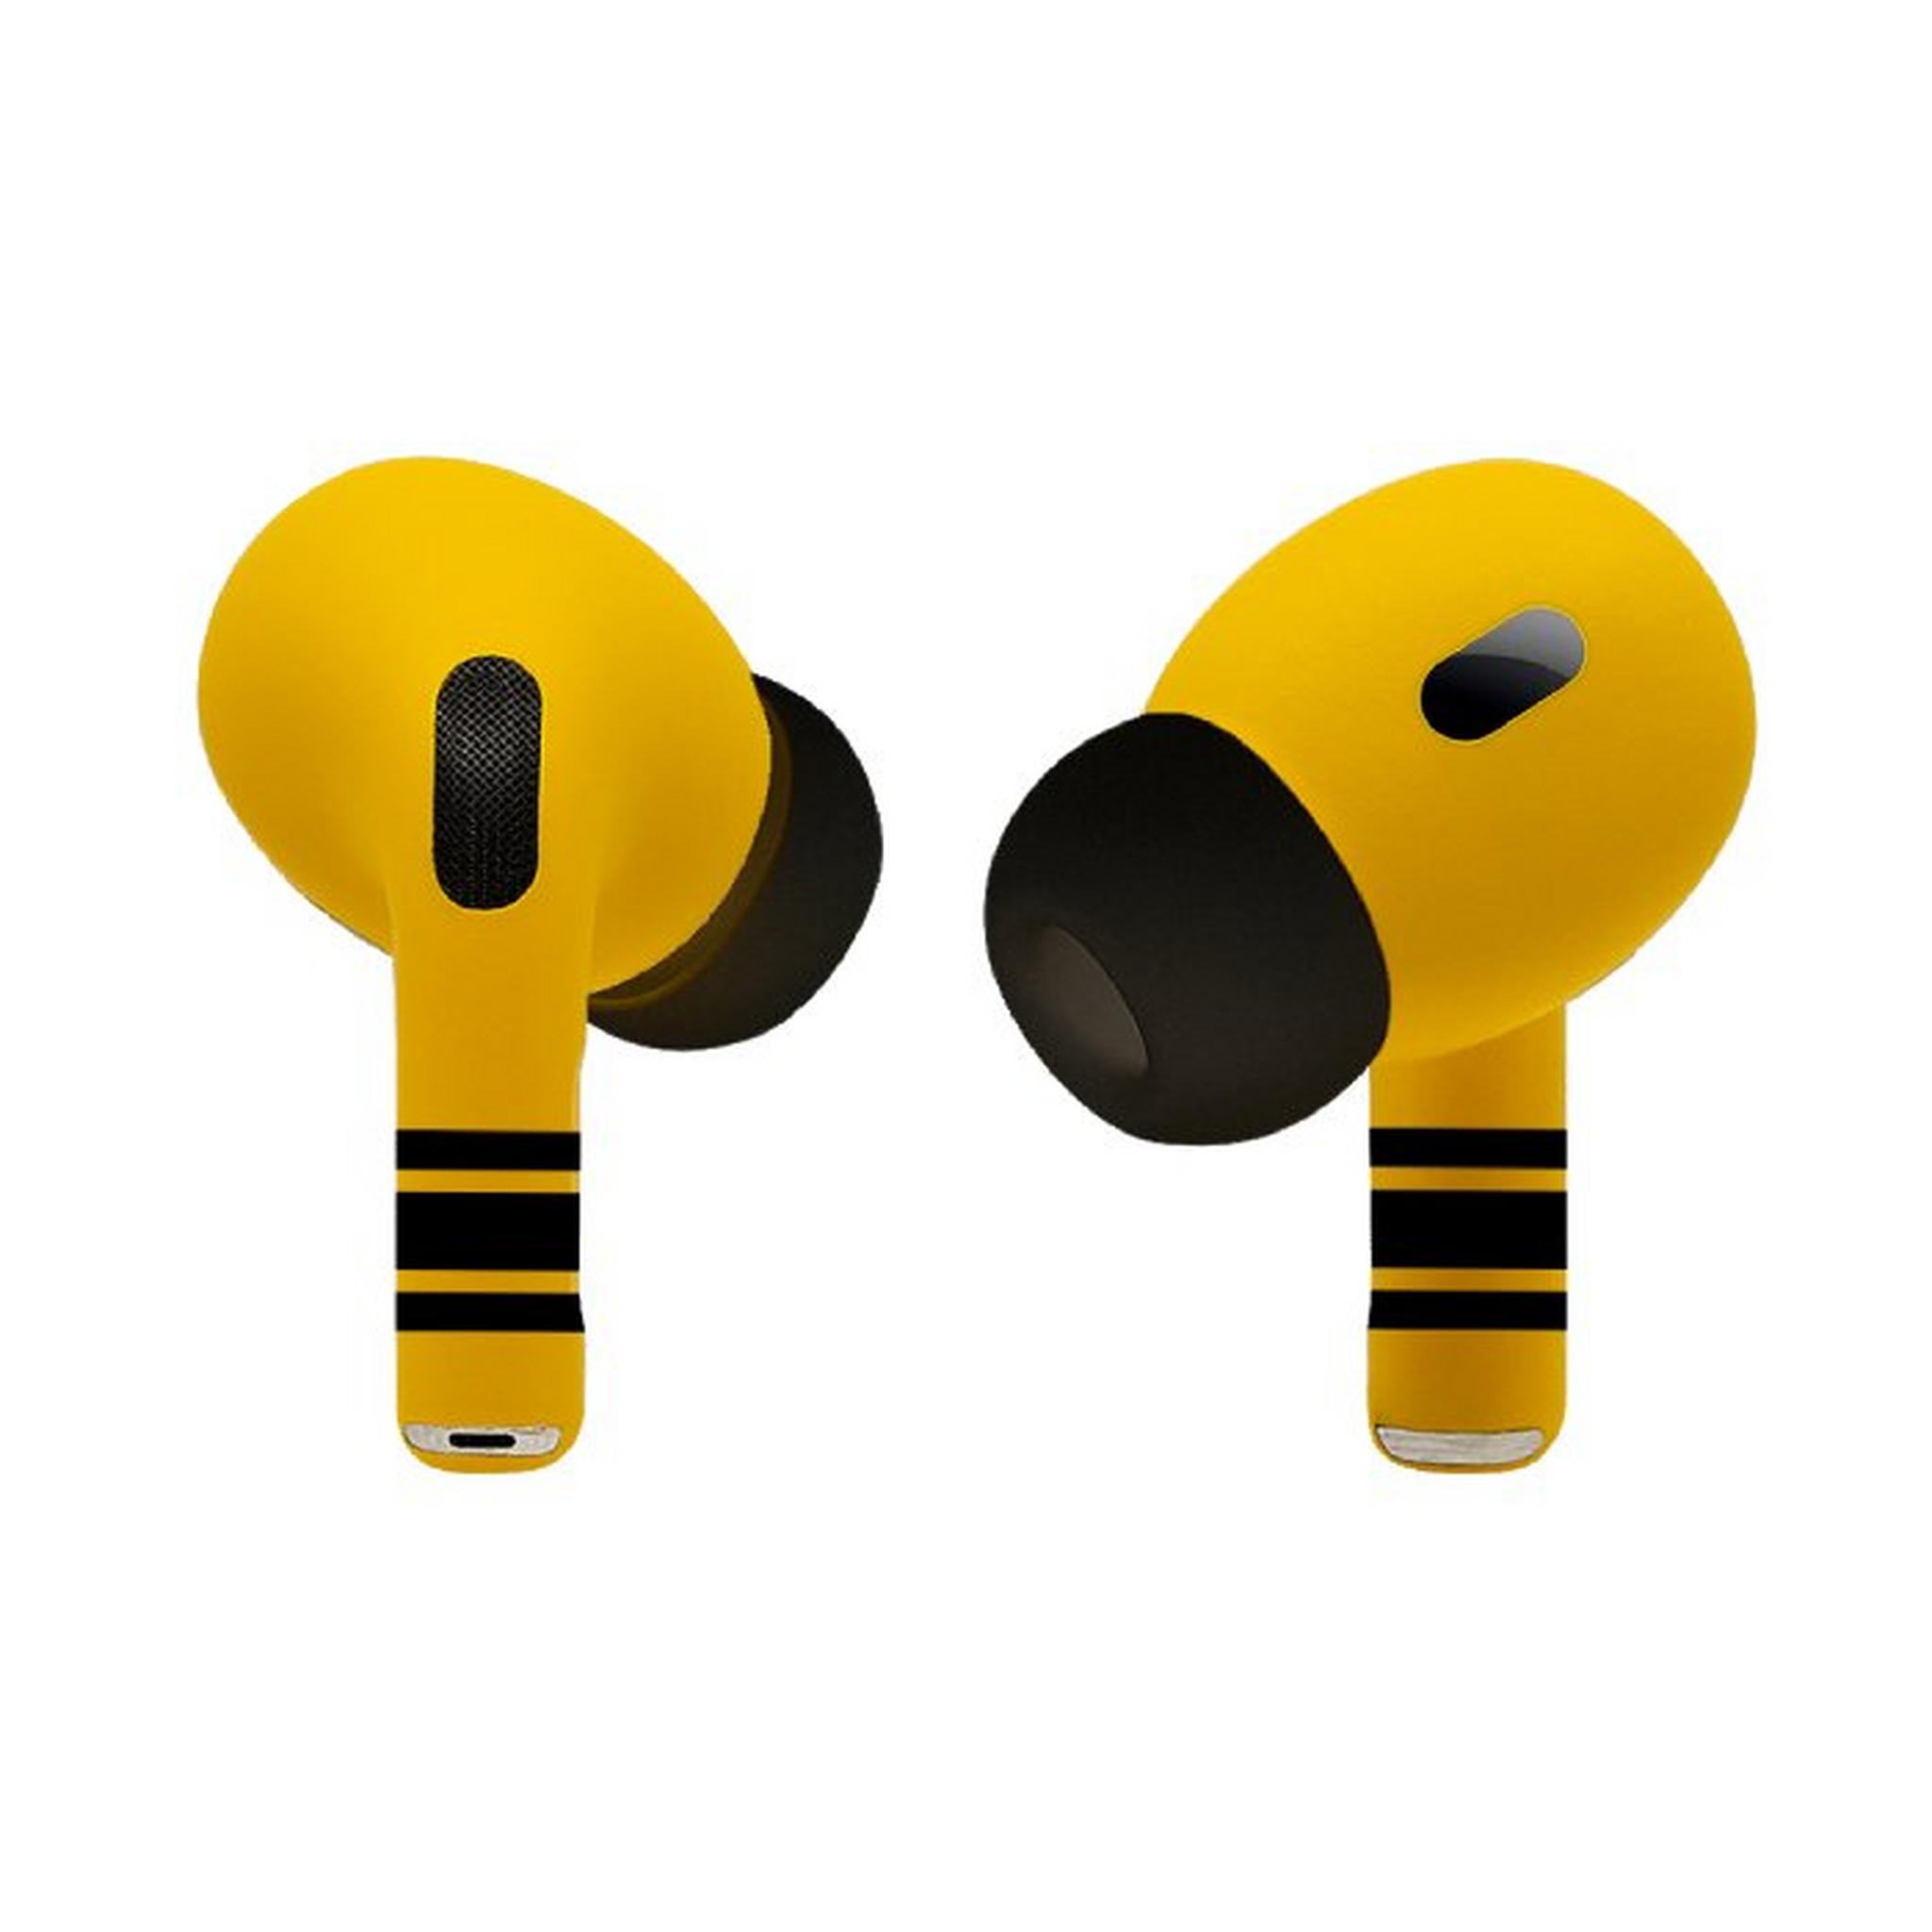 SWITCH Apple AirPods Pro Gen 2 Exclusive Le Mans Yellow, ROG2UCEXCPNTLMNSGB – Yellow&Black